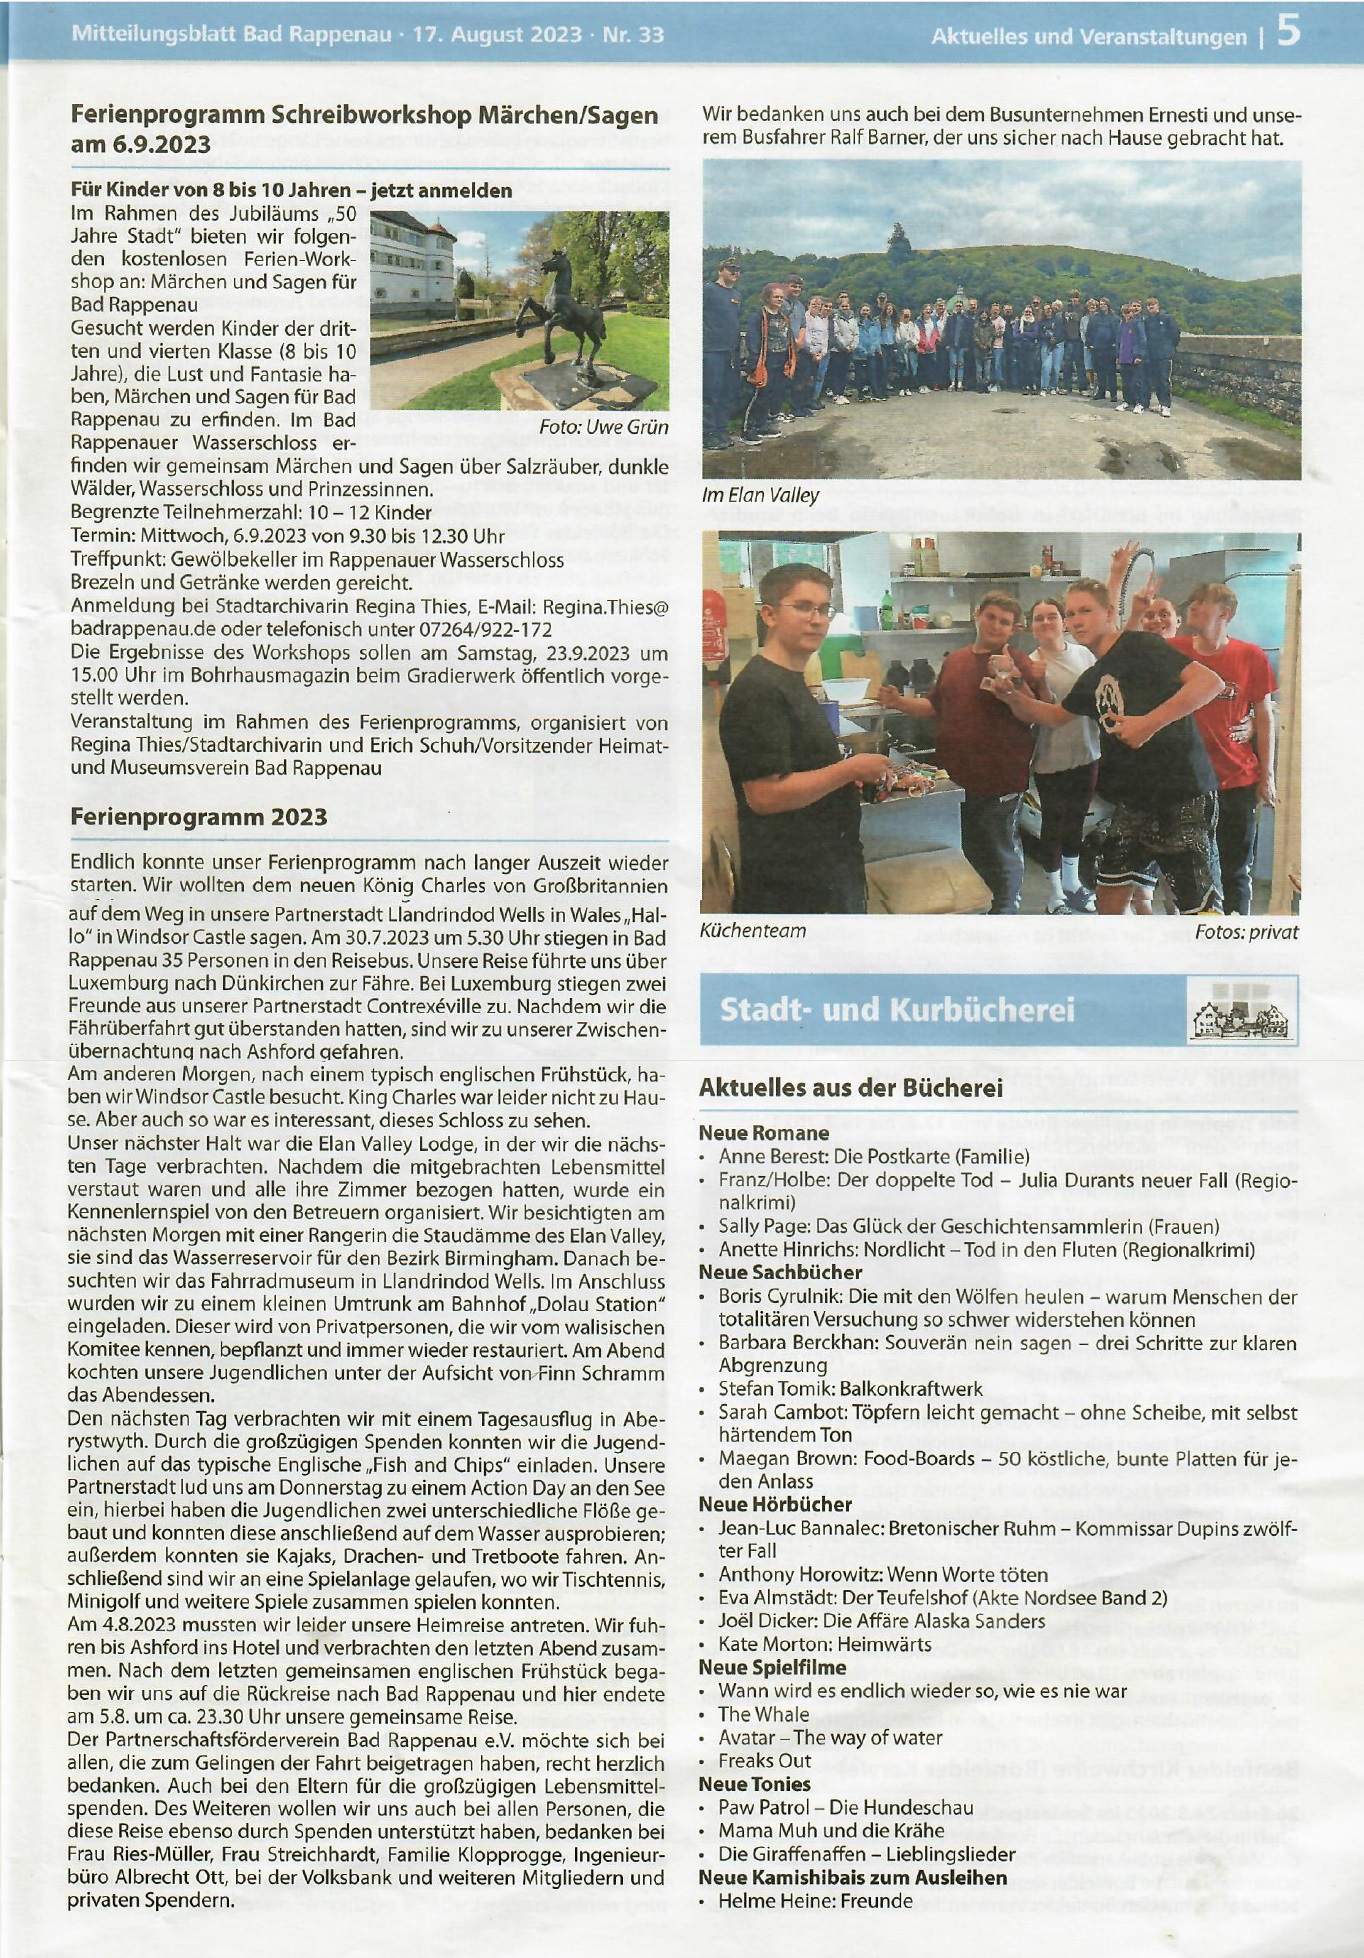 August 2023 Bad Rappenau Youth Visit press report